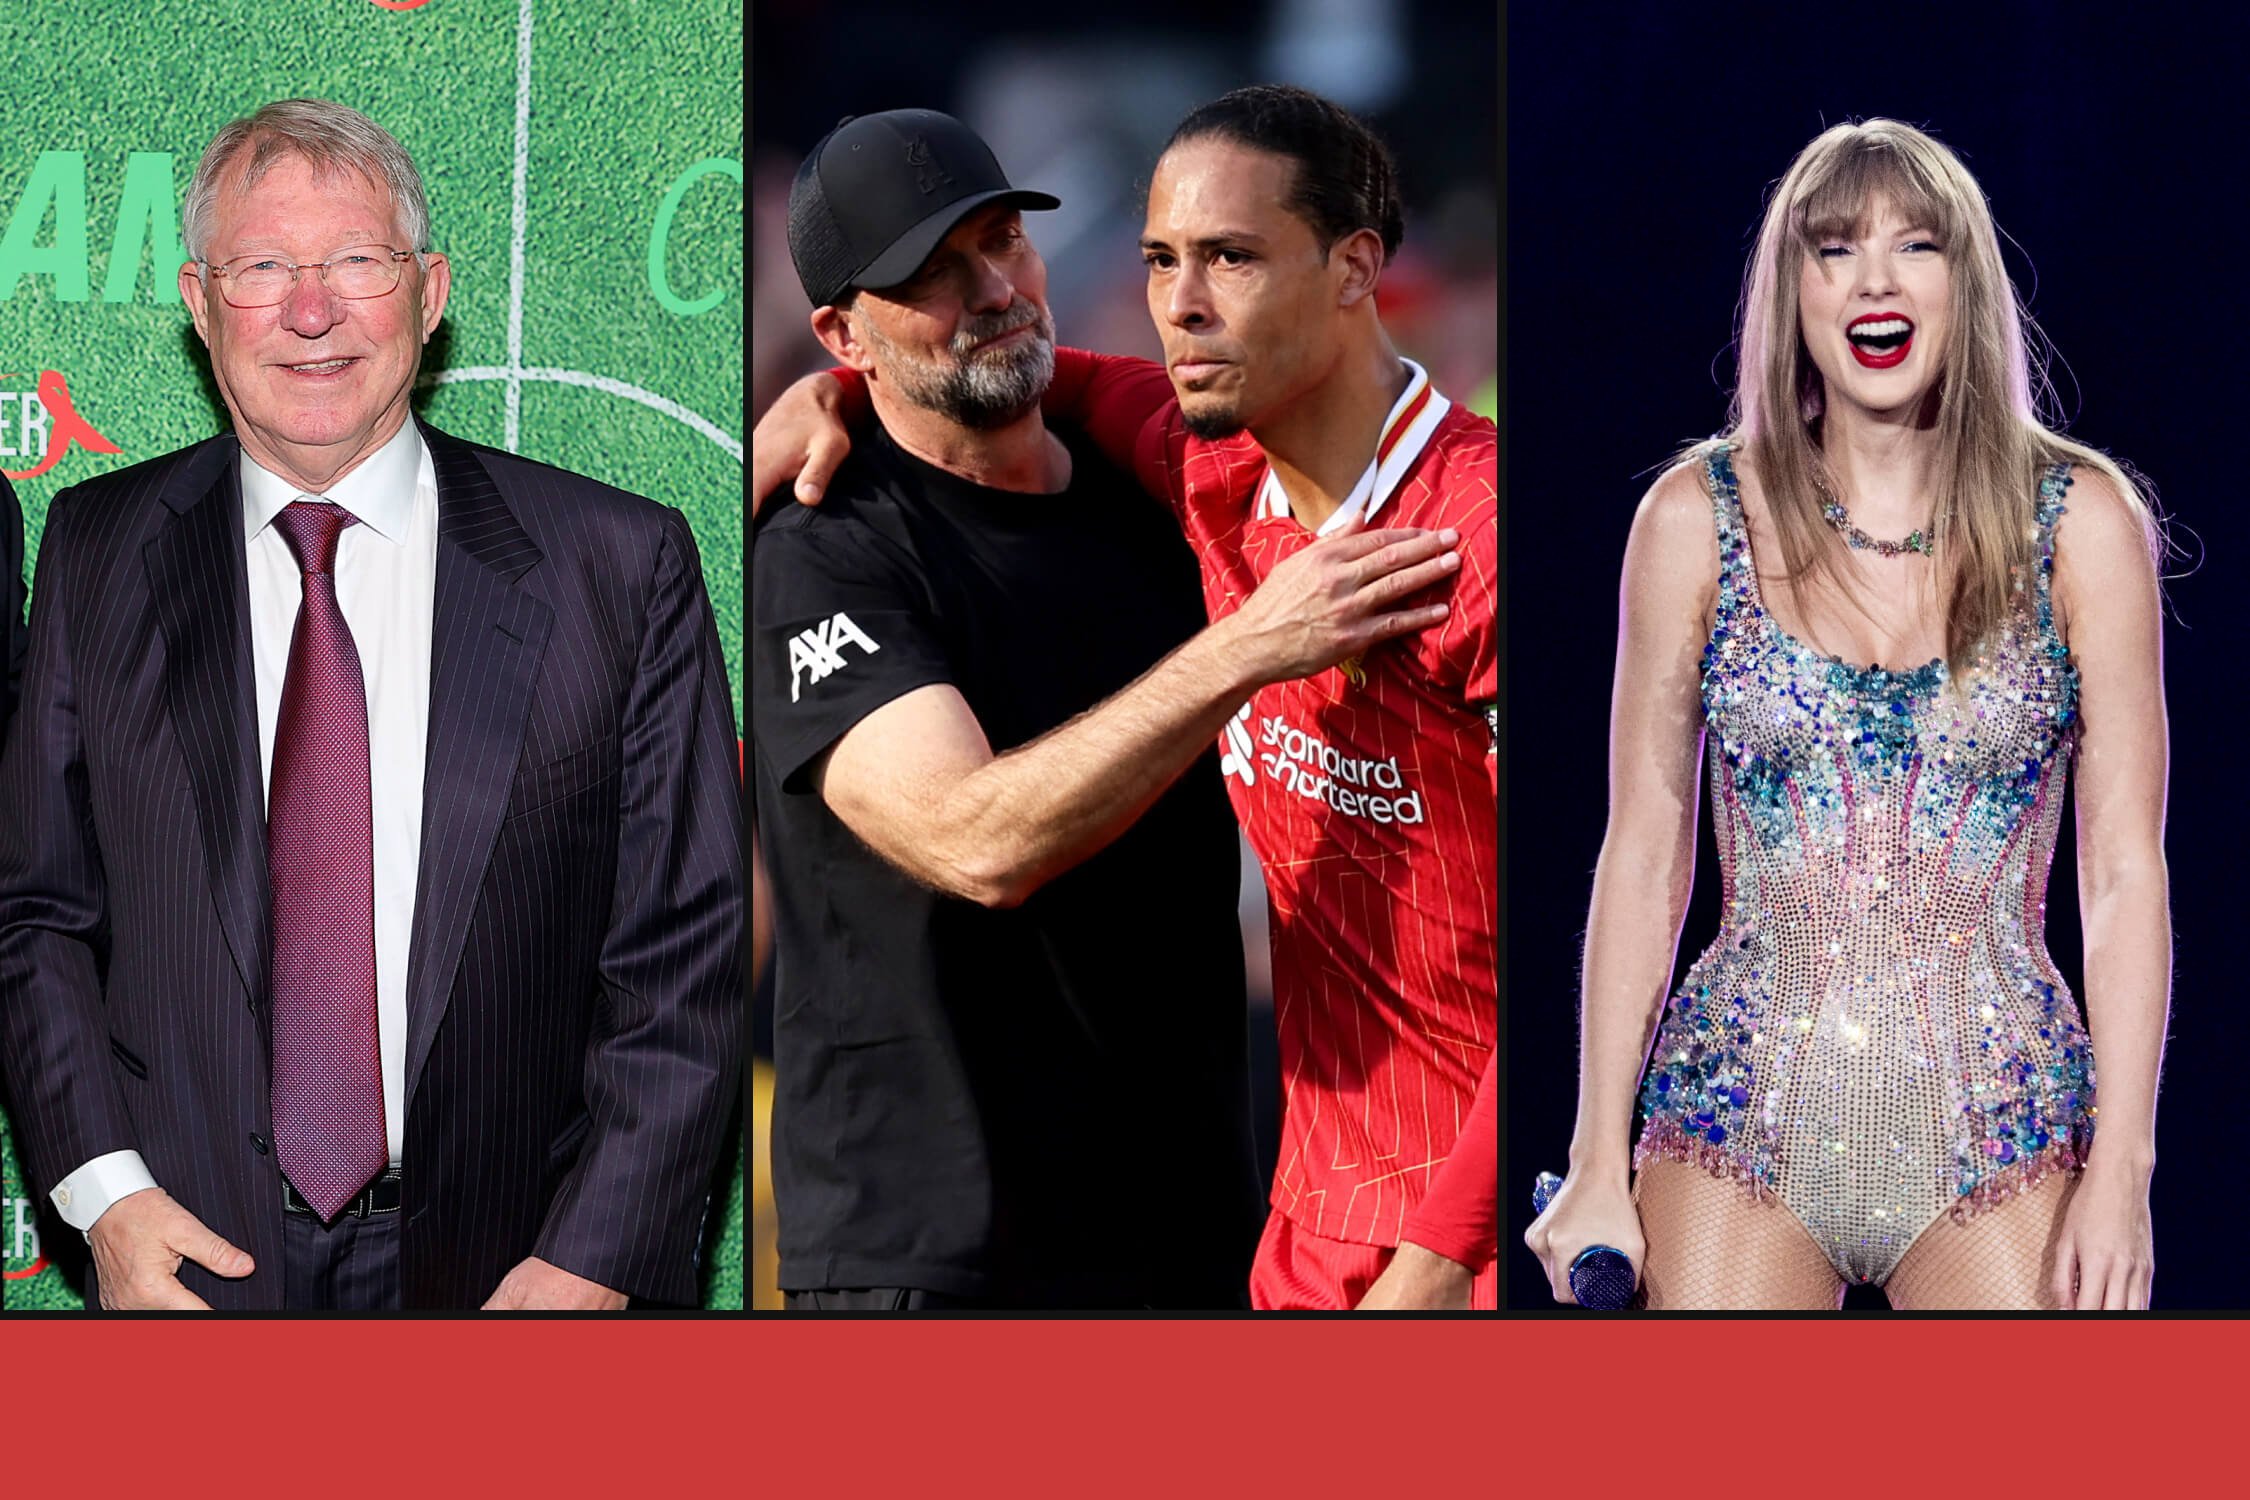 Liverpool's whirlwind week: Klopp meets Ferguson, Taylor Swift songs and Rolex watches